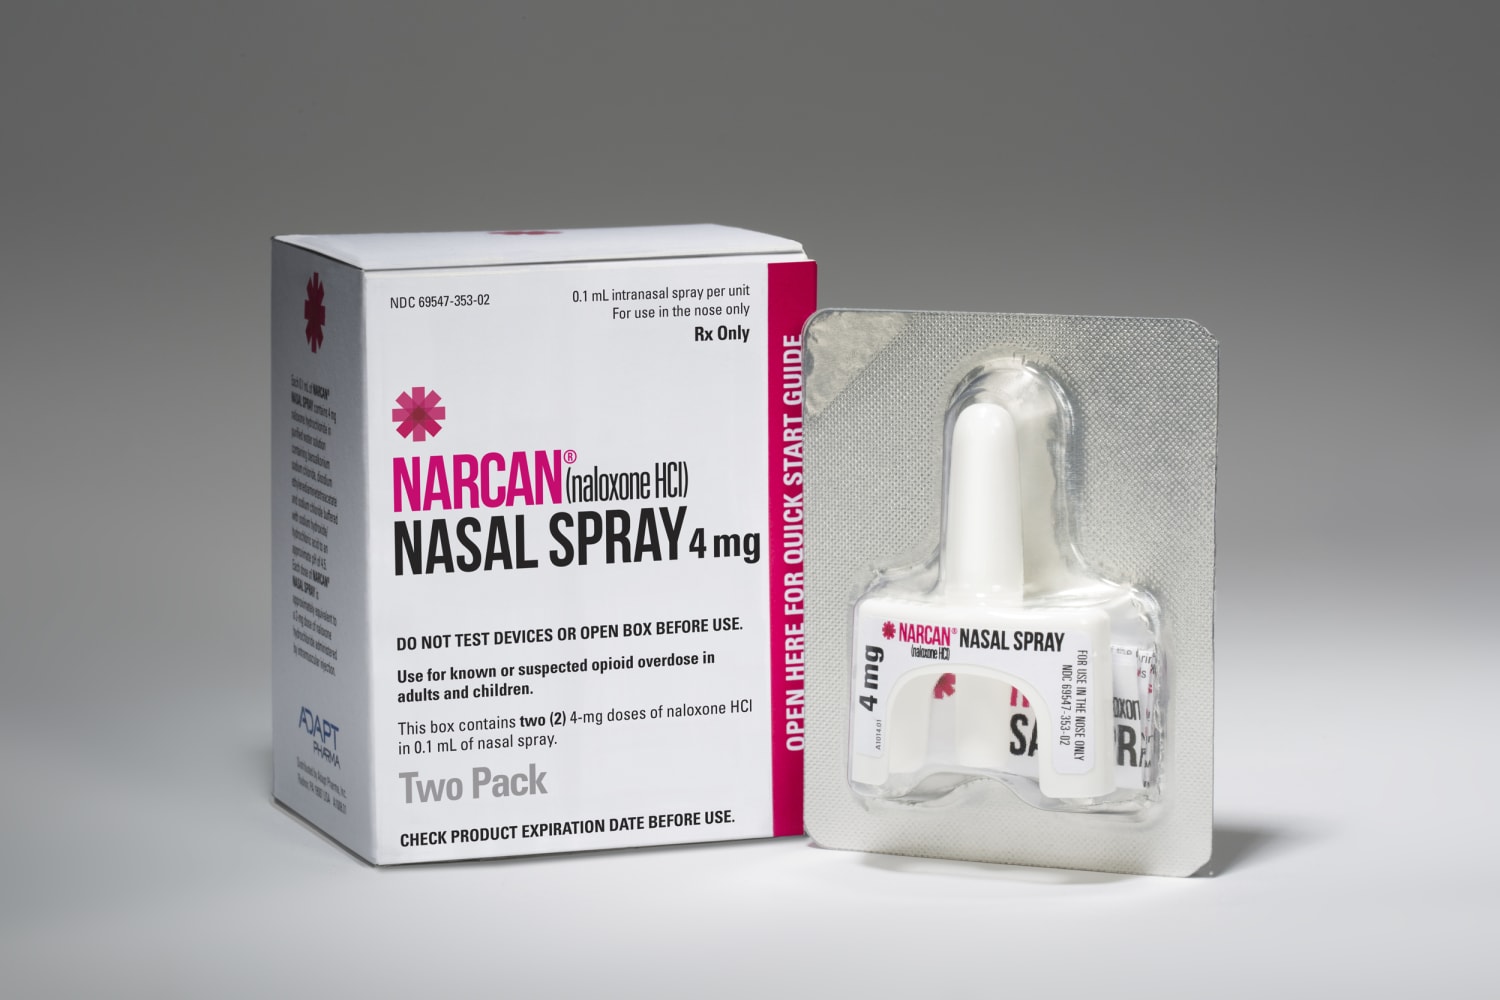 Surgeon general wants Naloxone widely on hand. Is this feasible?